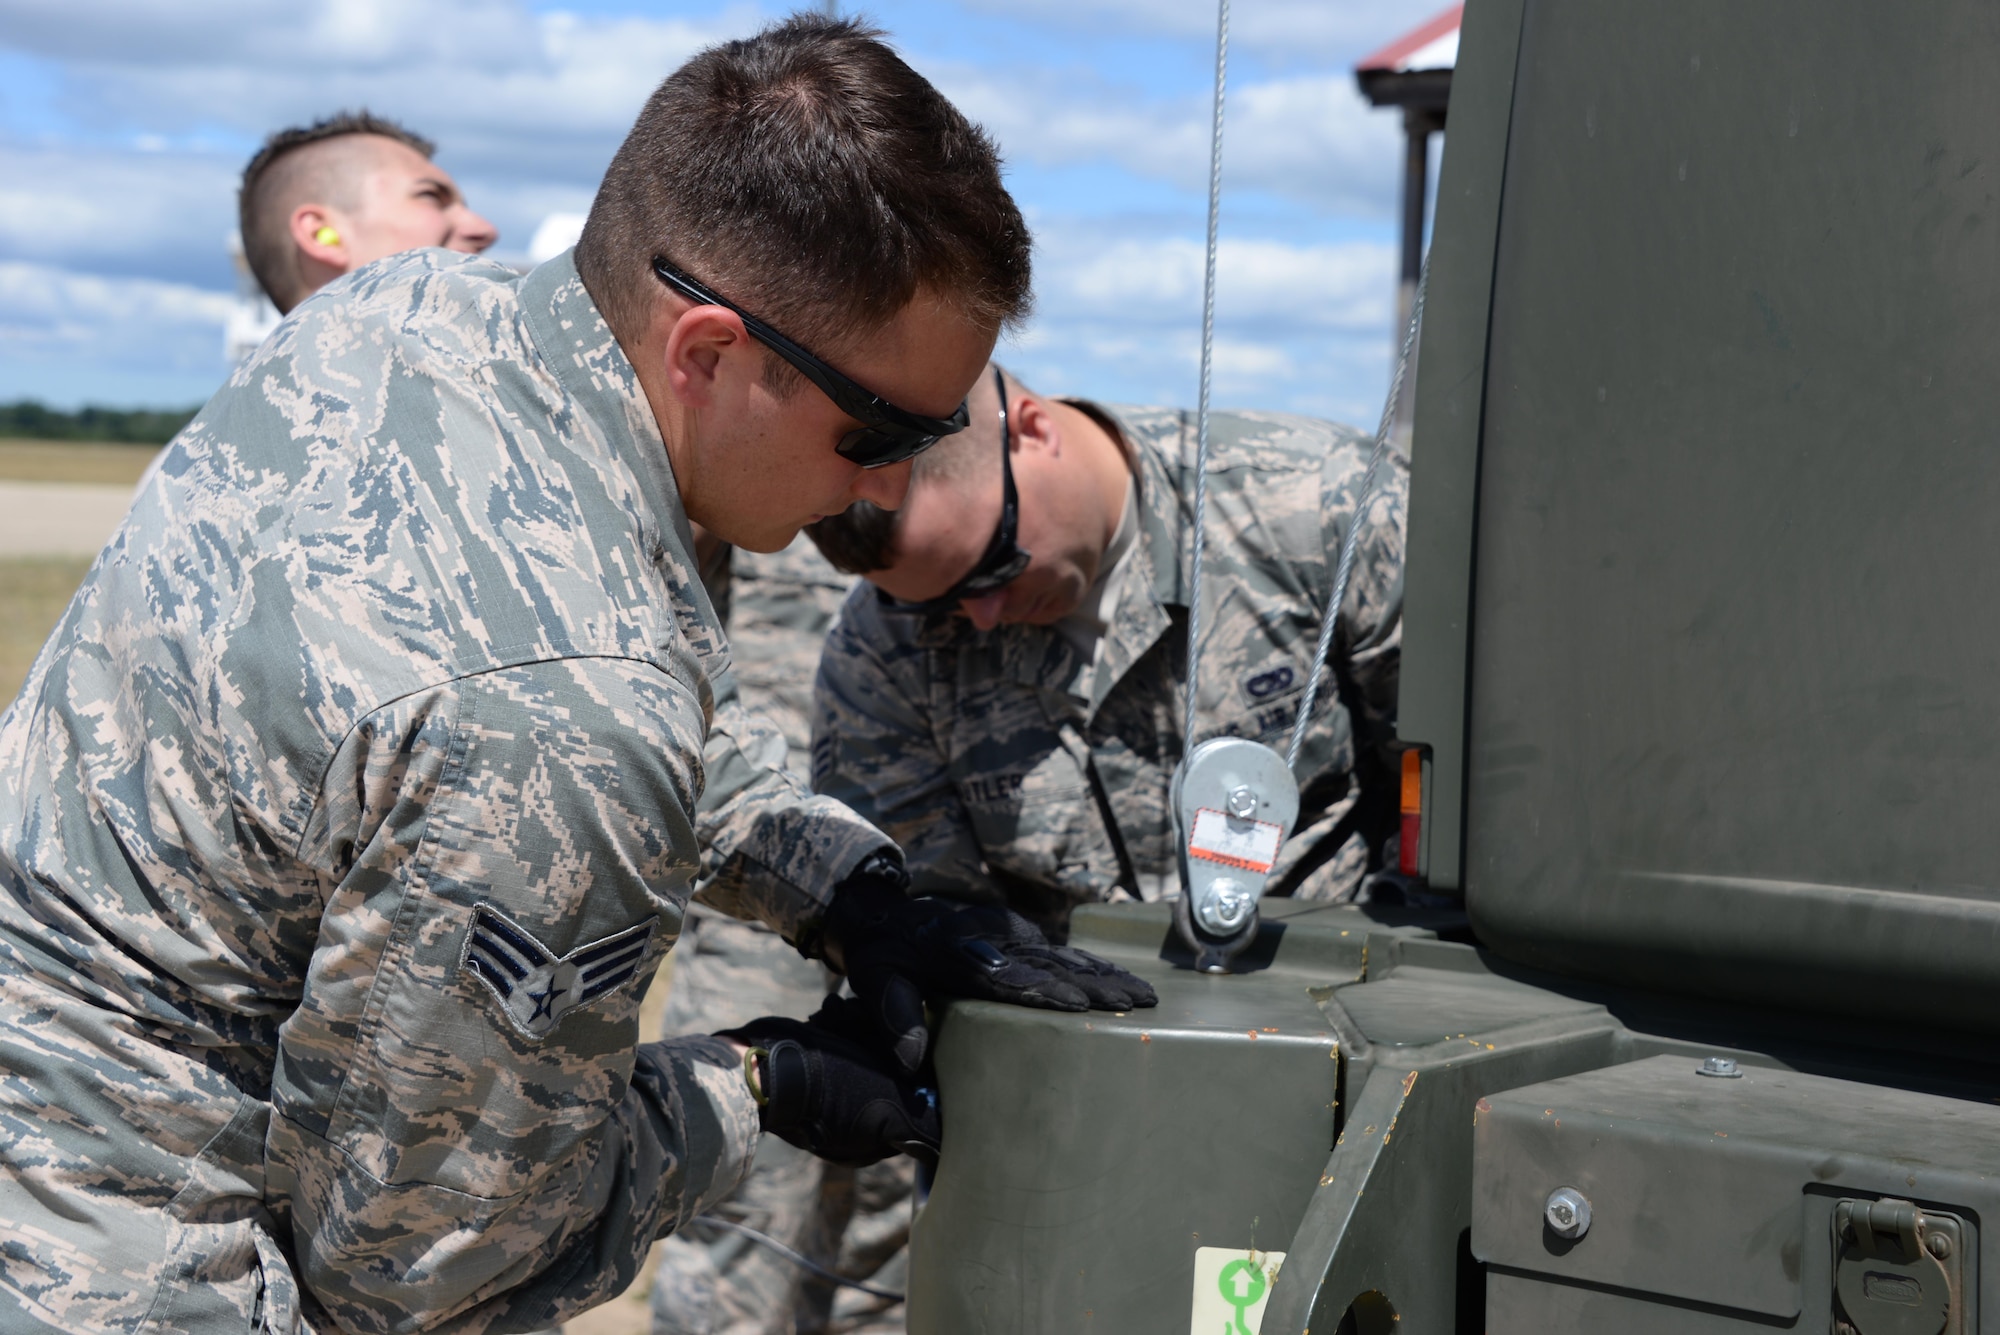 Senior Airman Ryan Fennessey, left, and Senior Airman Michael Butler, right, 821st Contingency Response Support Squadron air transportation journeymen, install a bumper on a 10k all-terrain forklift at Grayling Army Airfield, Michigan, during Exercise Northern Strike, Aug. 7, 2016.. Air transportation Airmen received on-the-job training in order to learn vehicle maintenance on the all-terrain forklift. (U.S. Air Force photo by Senior Airman Amber Carter)